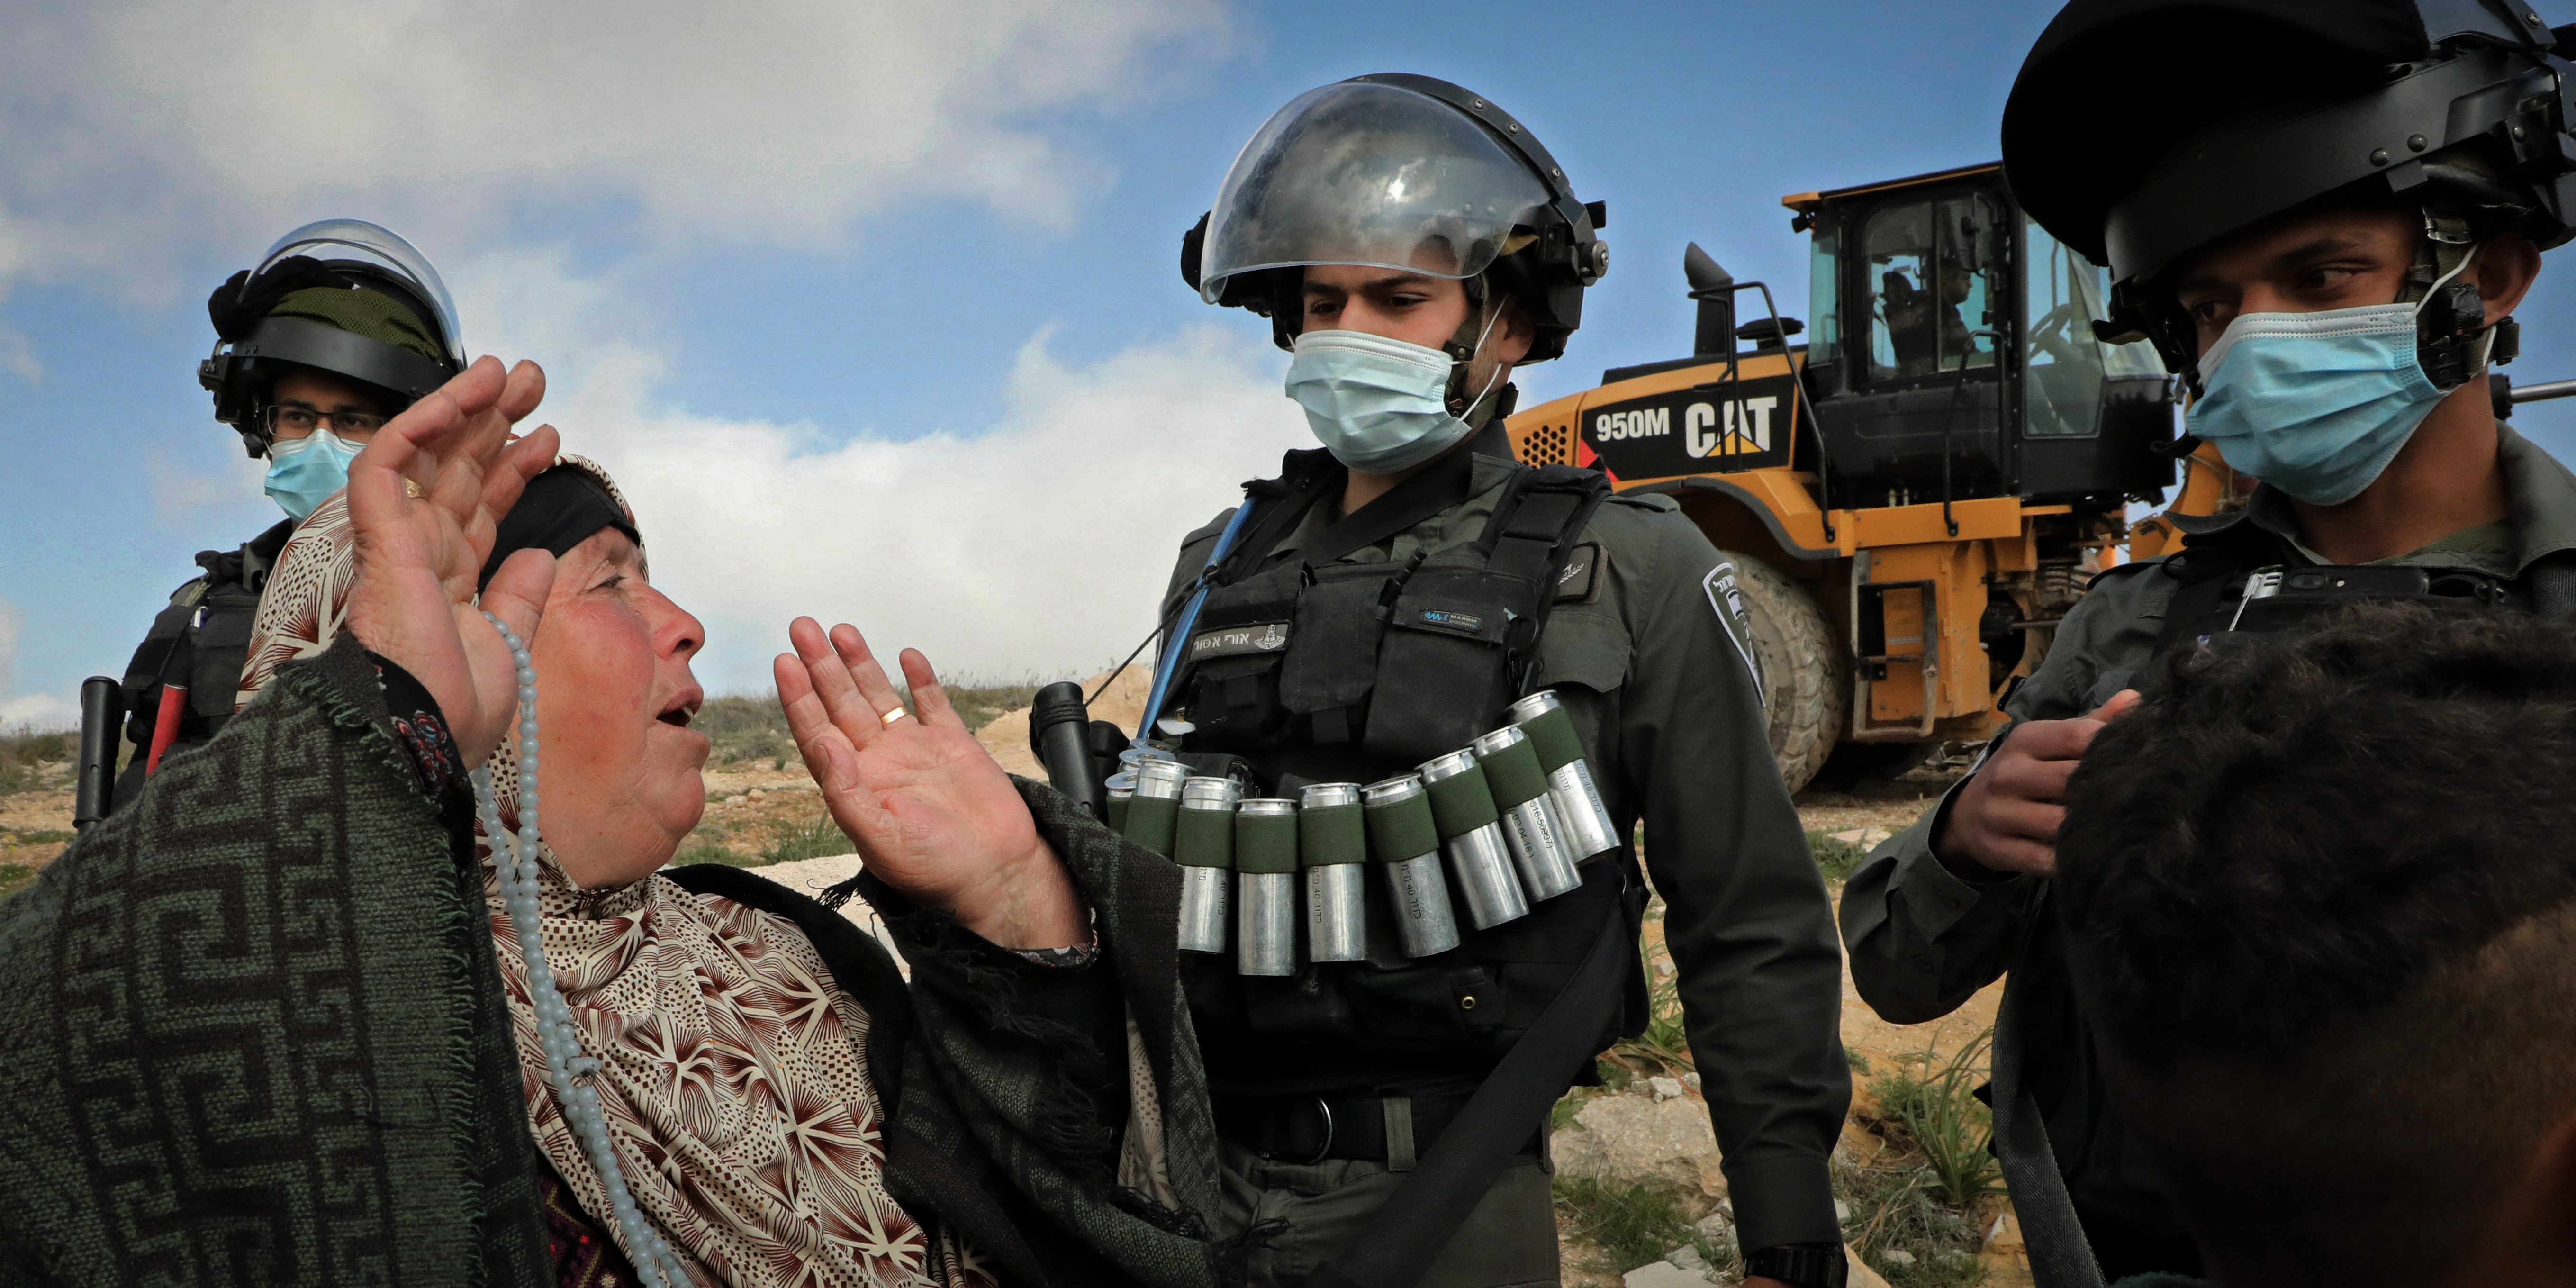 TOPSHOT - Palestinians react as Israeli authorities prepare to demolish a house located within the area C (where Israel retains control, including over planning and construction) in a village south of Yatta in the southern area of the West Bank town of Hebron, on March 2, 2021. (Photo by HAZEM BADER / AFP) (Photo by HAZEM BADER/AFP via Getty Images)